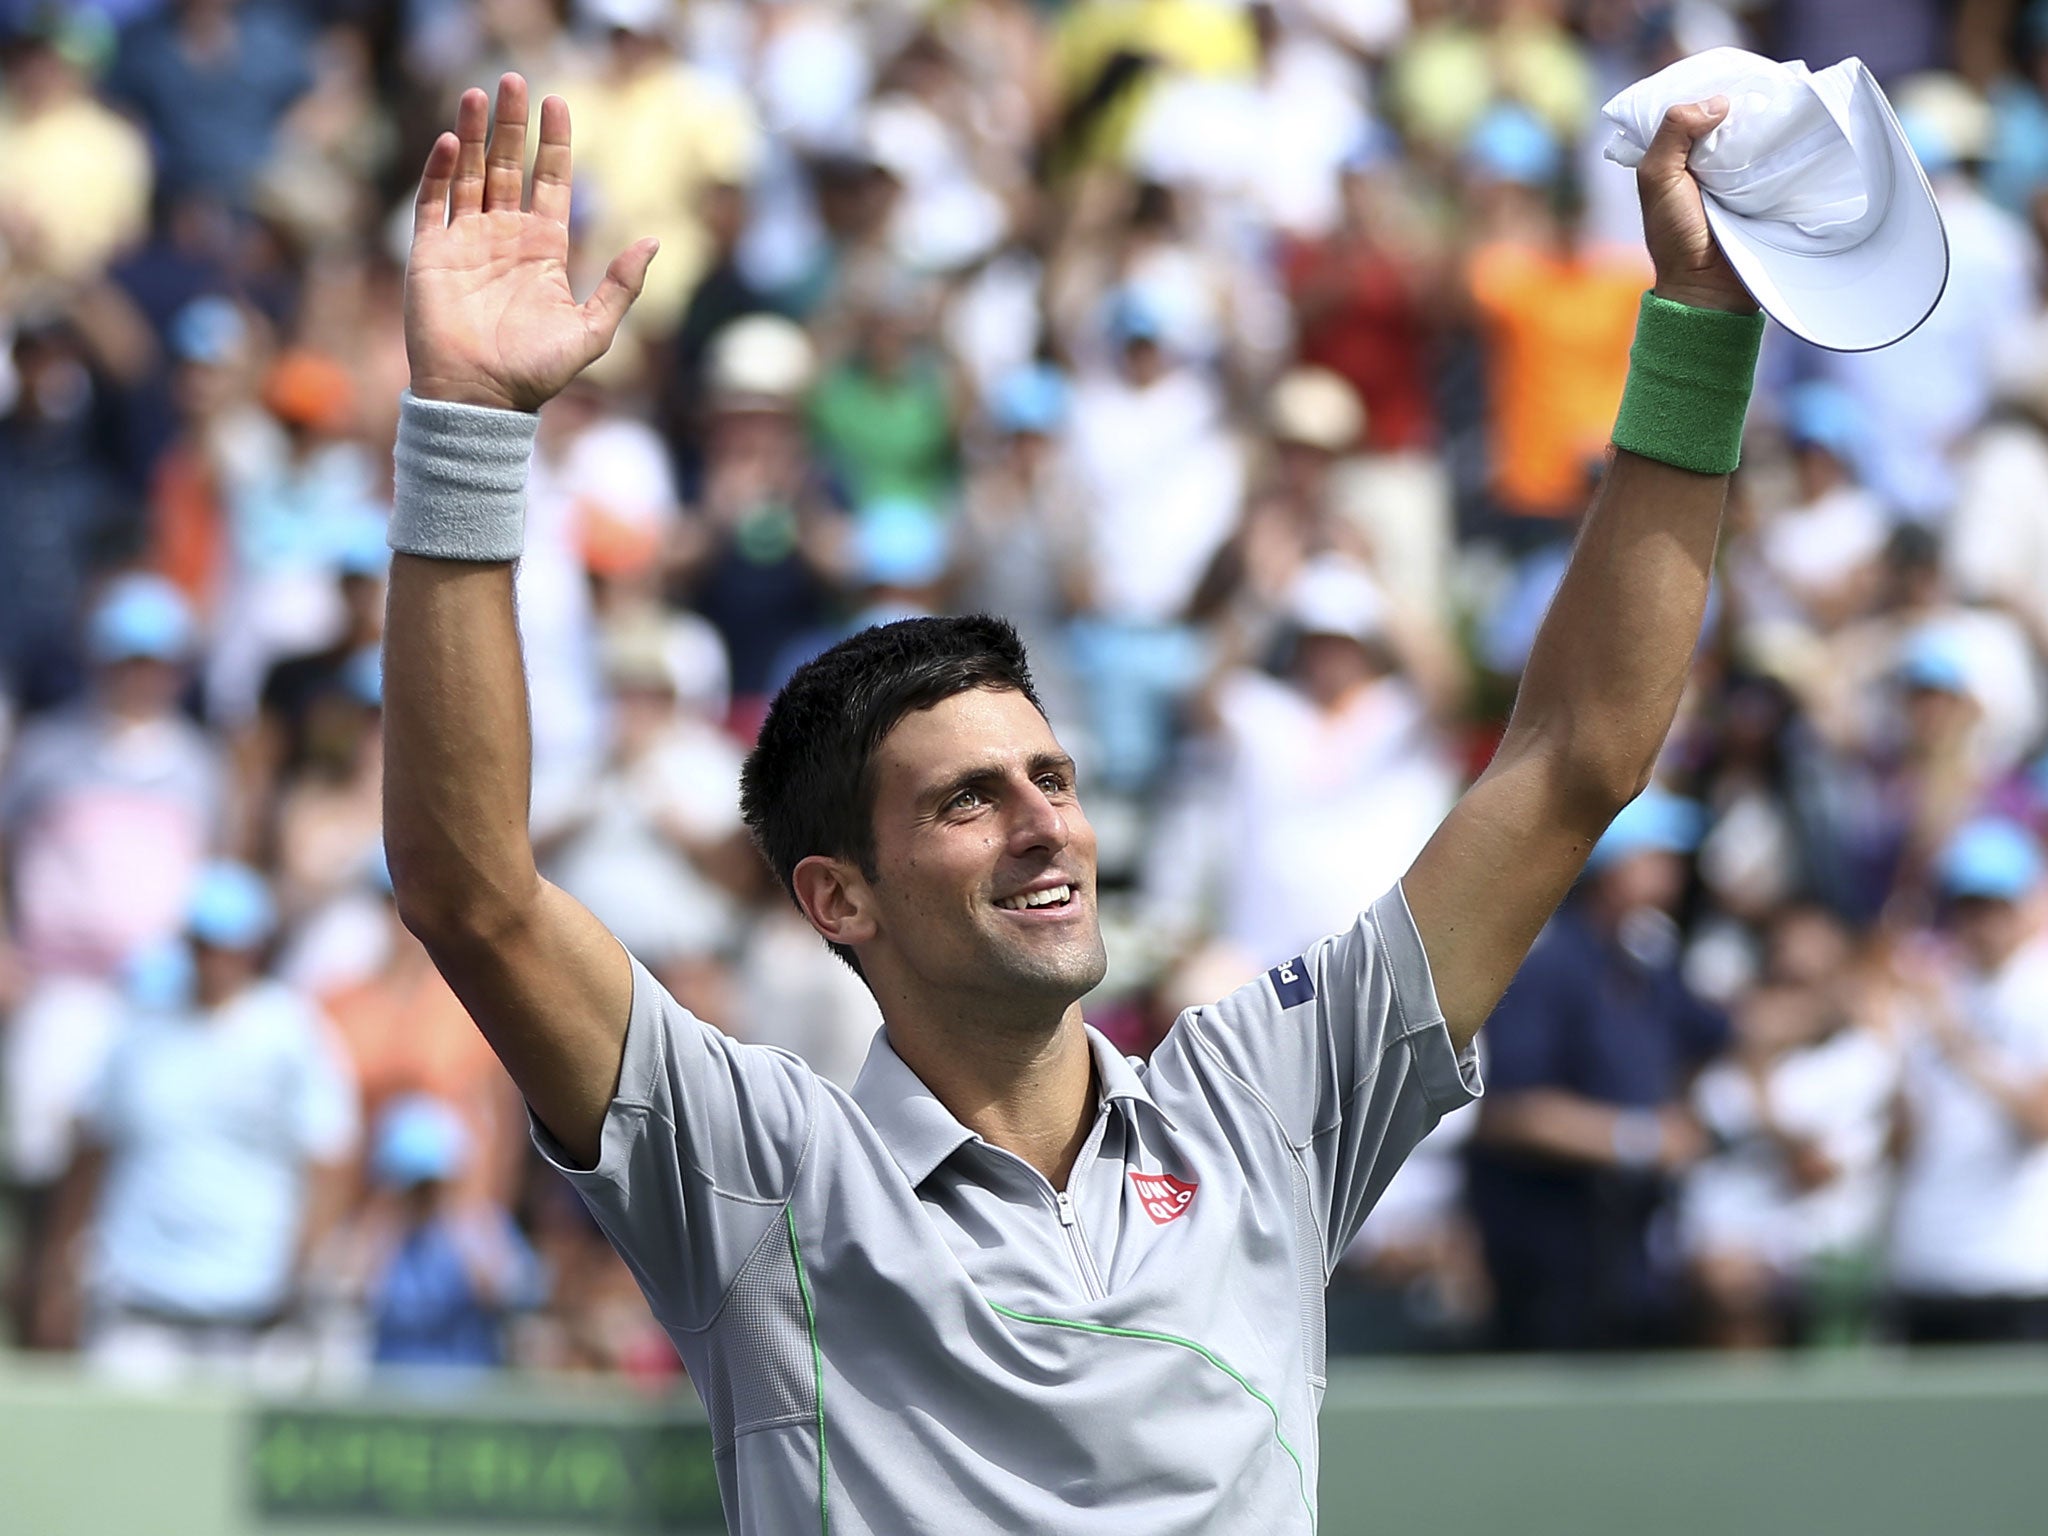 Novak Djokovic enjoys the moment after his 6-3, 6-3 win in the Miami Masters final